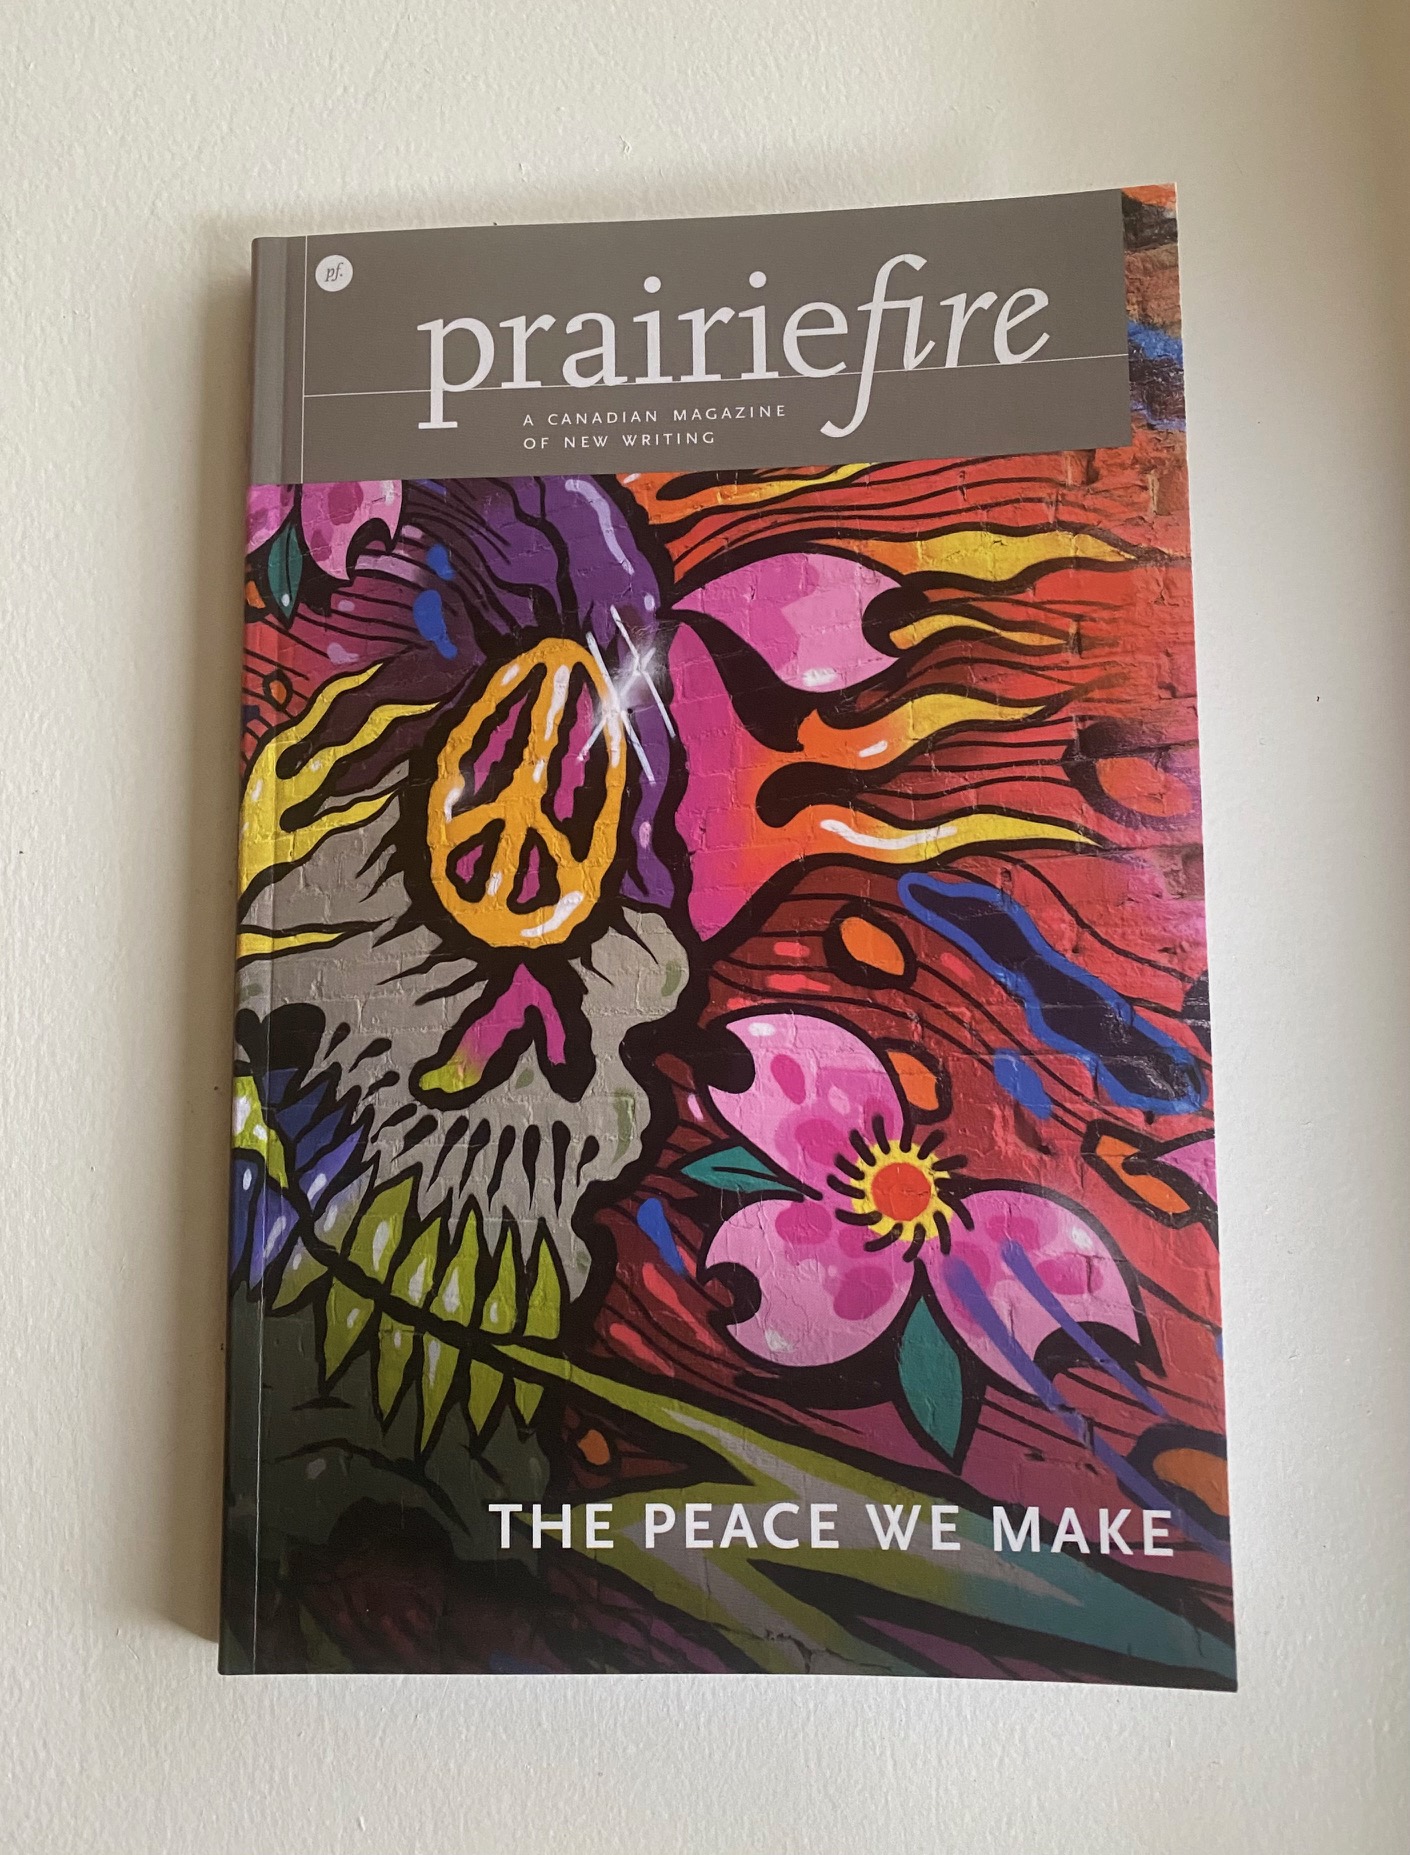 Cover of Prairie Fire Magazine featuring graffiti art with peace symbol and flower